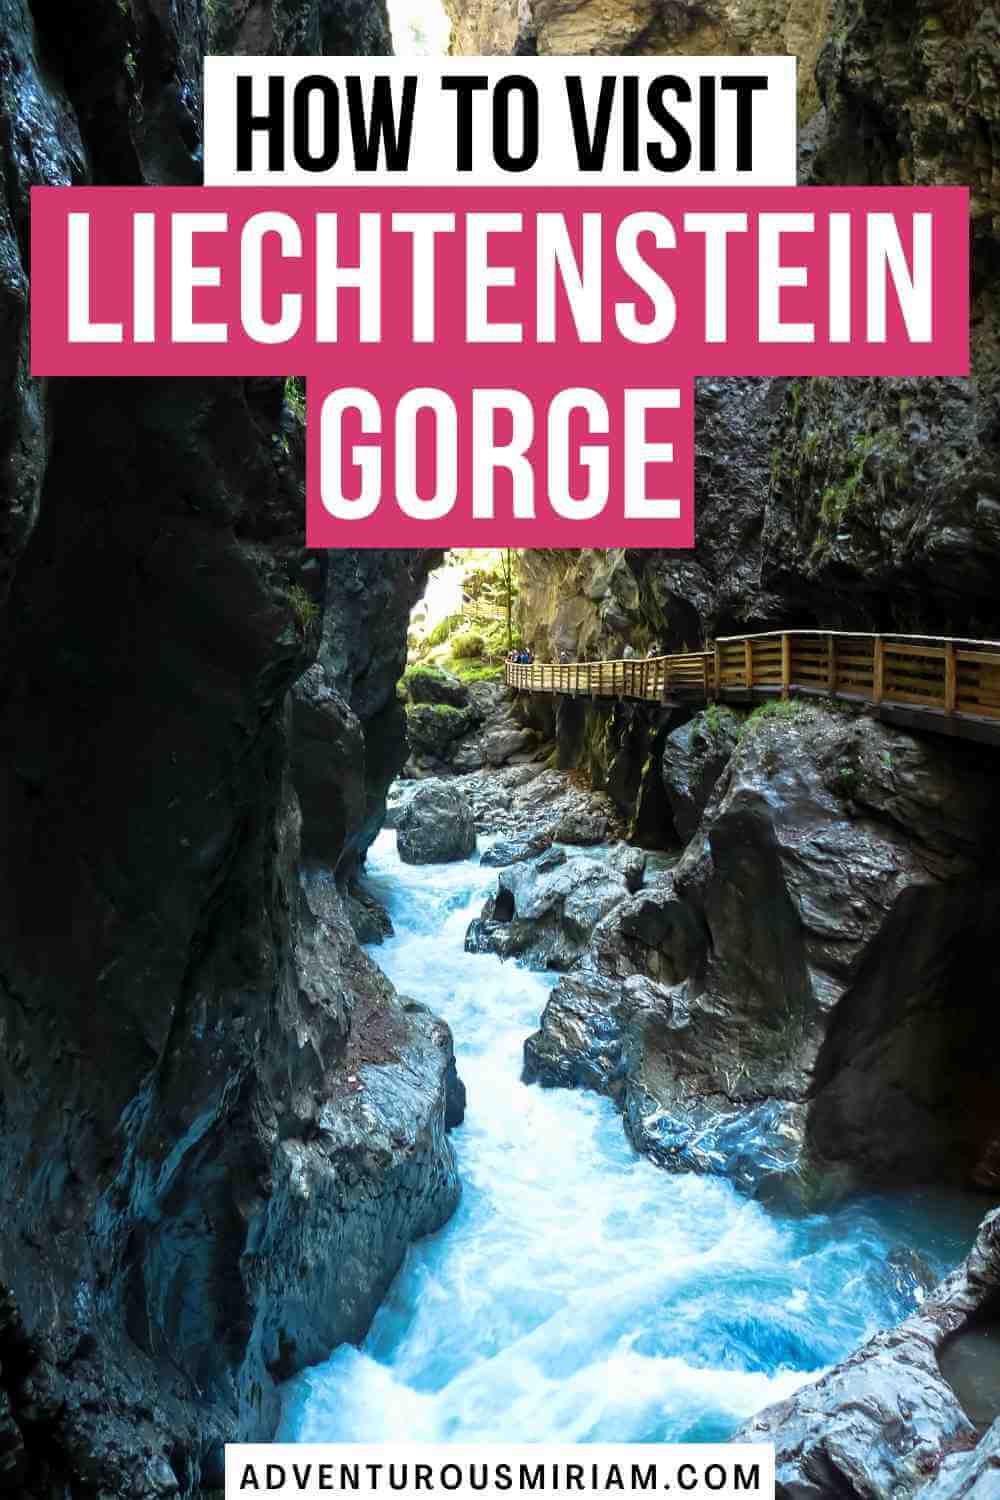 This is Liechtensteinklamm, a spectacular gorge in Austria. Think emerald-green water, mossy stones, vertigo-inducing cliffs, misty waterfalls and ancient legends. It's only 50km south of Salzburg and one of the deepest and longest gorges in the Alps. Get your travel guide to Liechtensteinklamm here. Europe travel. Liechtensteinklamm gorge. Liechtenstein gorge Austria. St Johann Im Pongau. Salzburgerland.